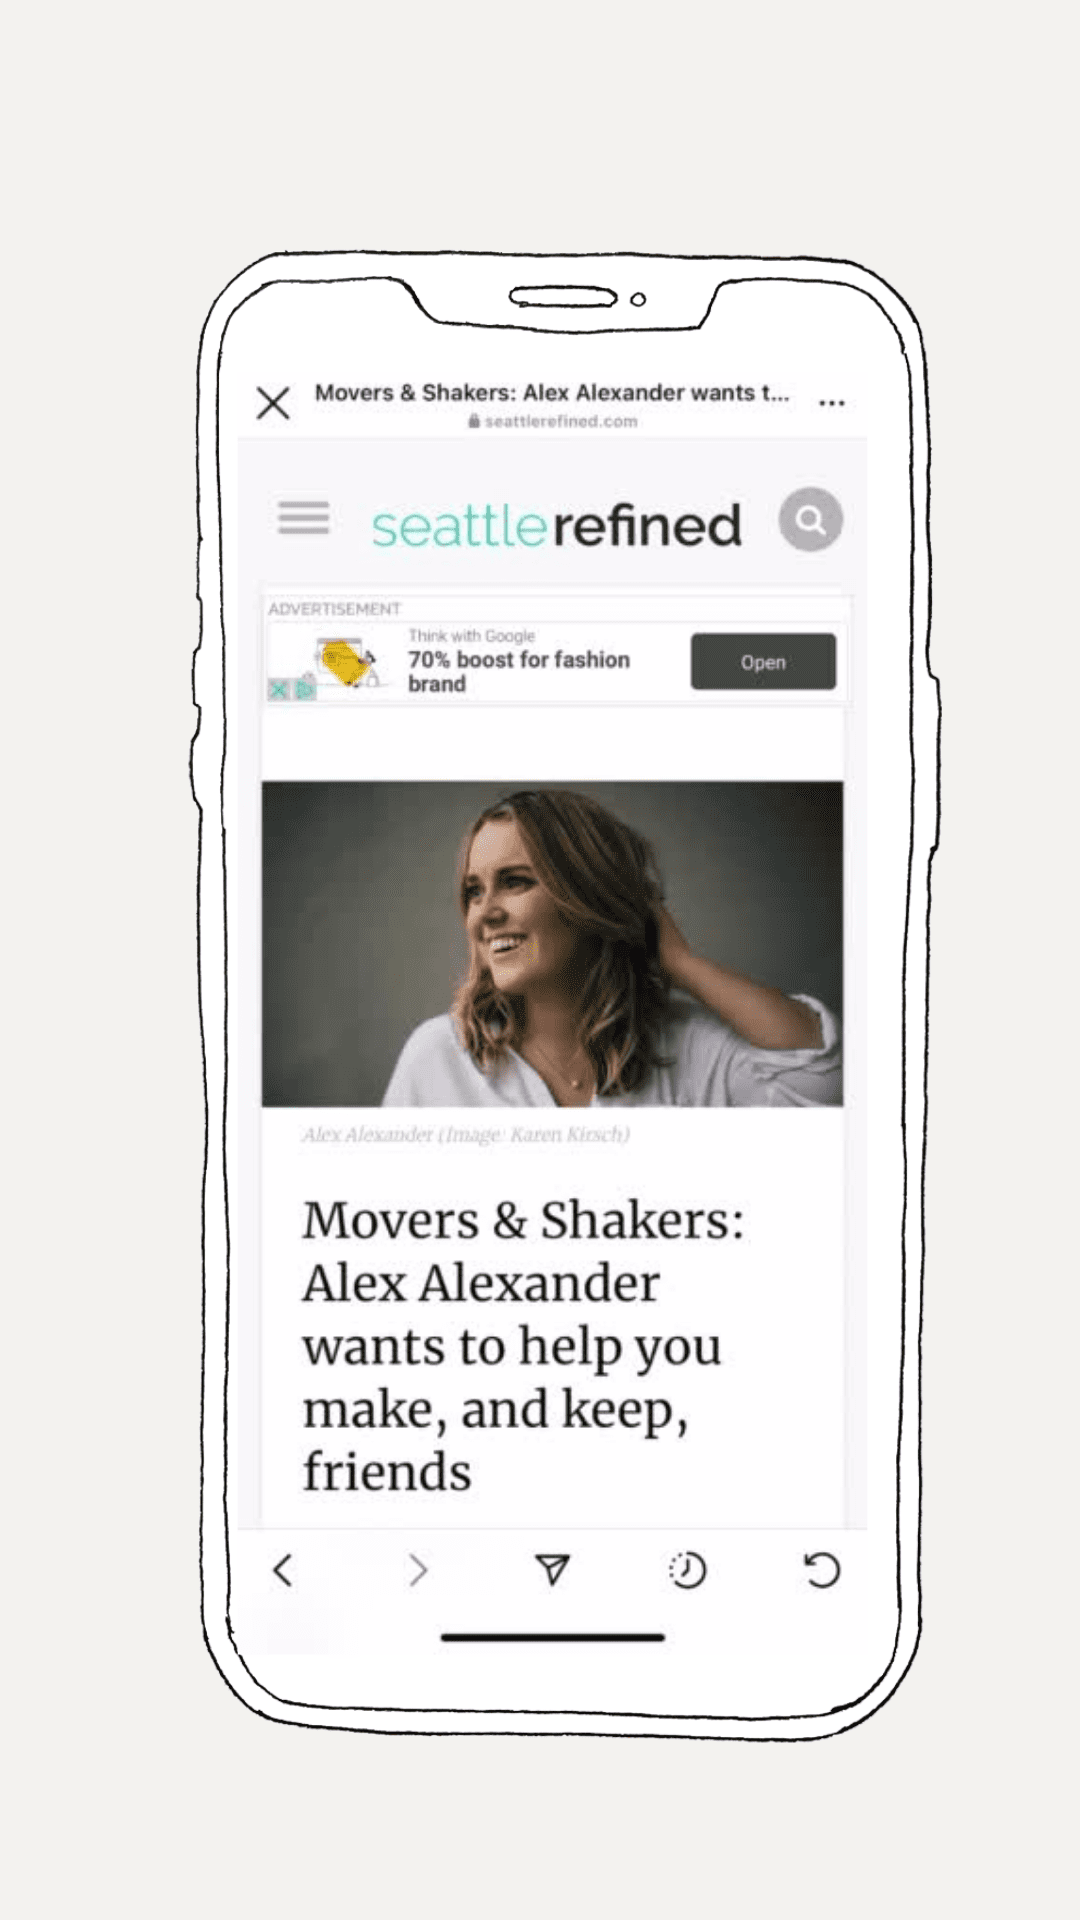 Seattle Refined: Movers & Shakers